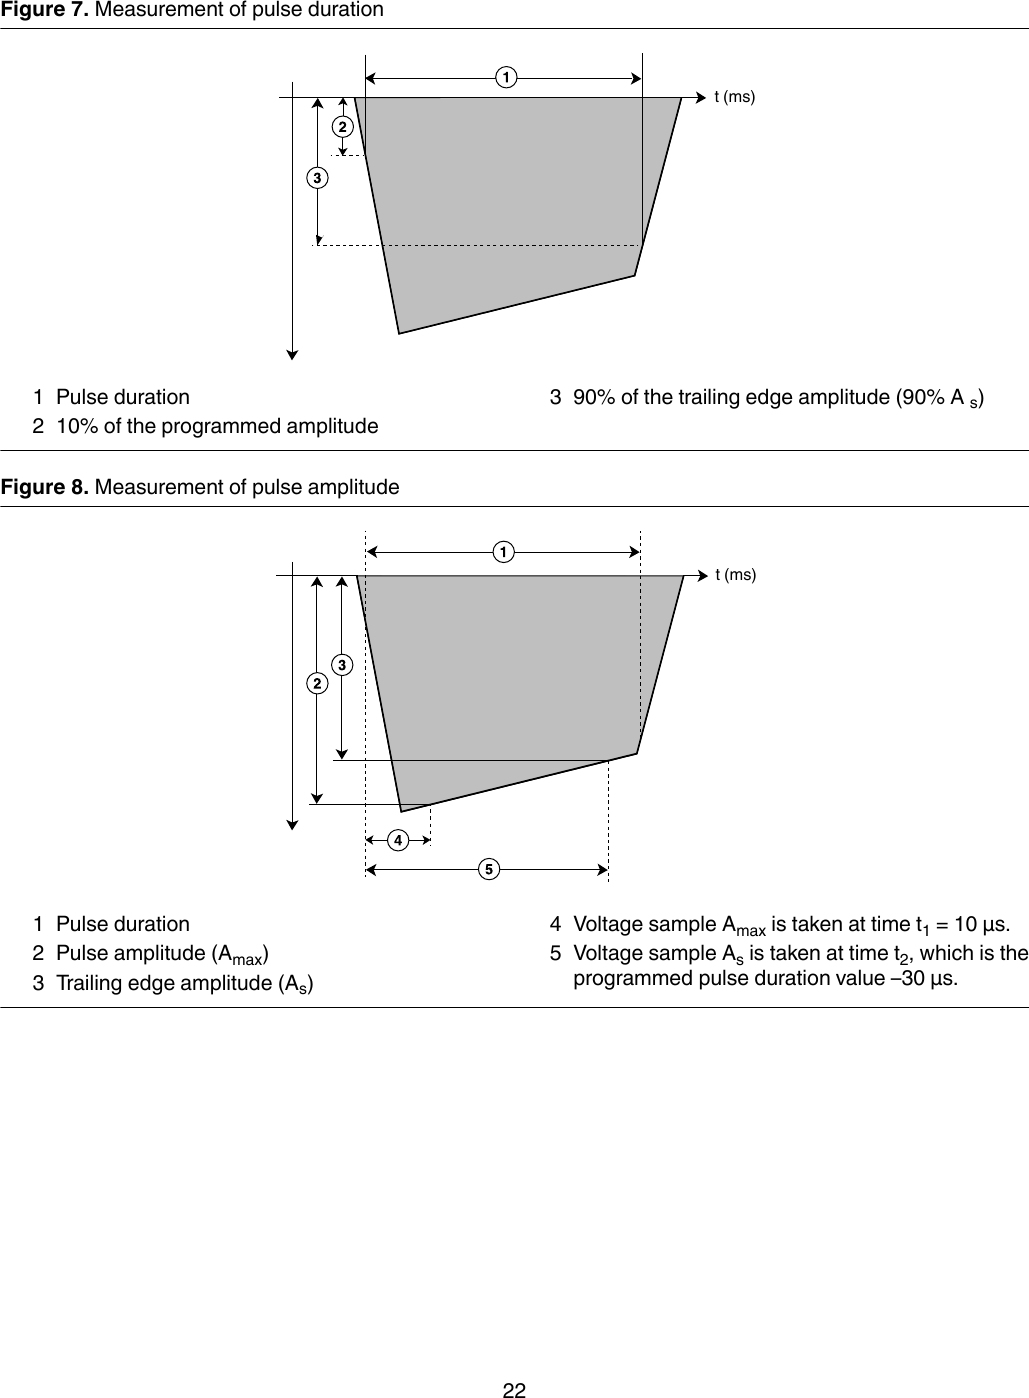 Figure 7. Measurement of pulse durationt (ms)1 Pulse duration2 10% of the programmed amplitude3 90% of the trailing edge amplitude (90% A s)Figure 8. Measurement of pulse amplitudet (ms)1 Pulse duration2 Pulse amplitude (Amax)3 Trailing edge amplitude (As)4 Voltage sample Amax is taken at time t1 = 10 µs.5 Voltage sample As is taken at time t2, which is theprogrammed pulse duration value –30 µs.22